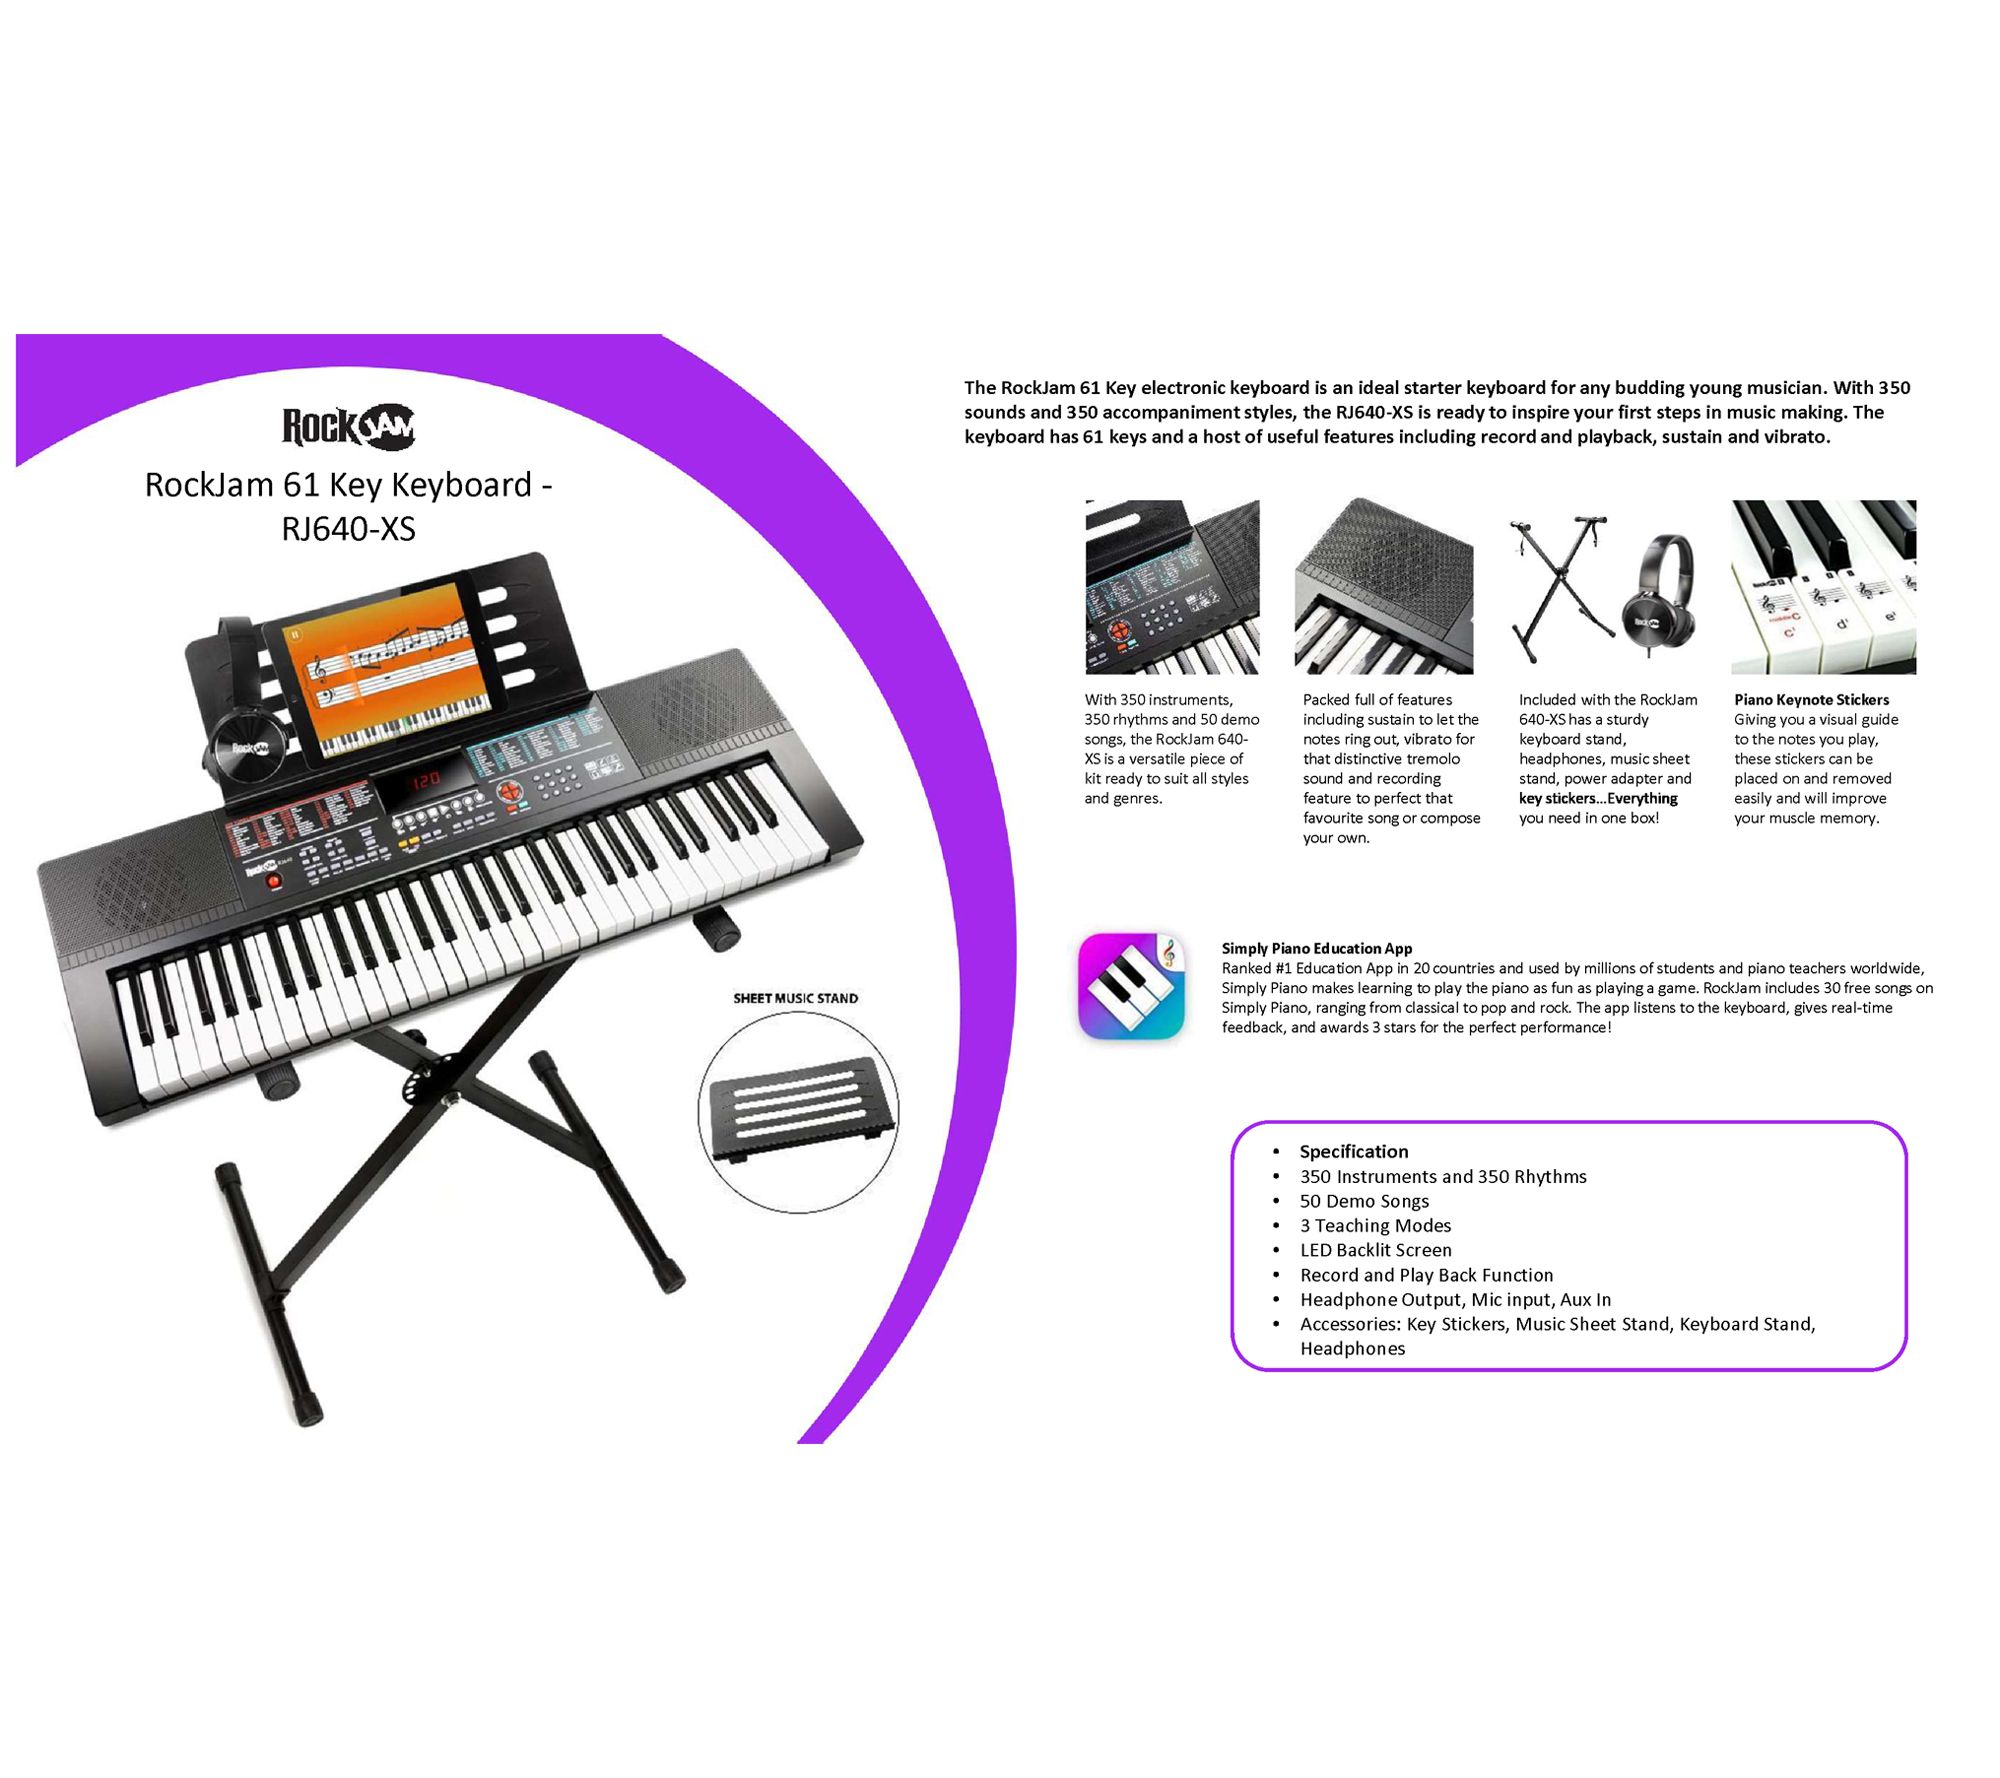 The Display of 61 Electric Piano Keyboard with Stand Touch